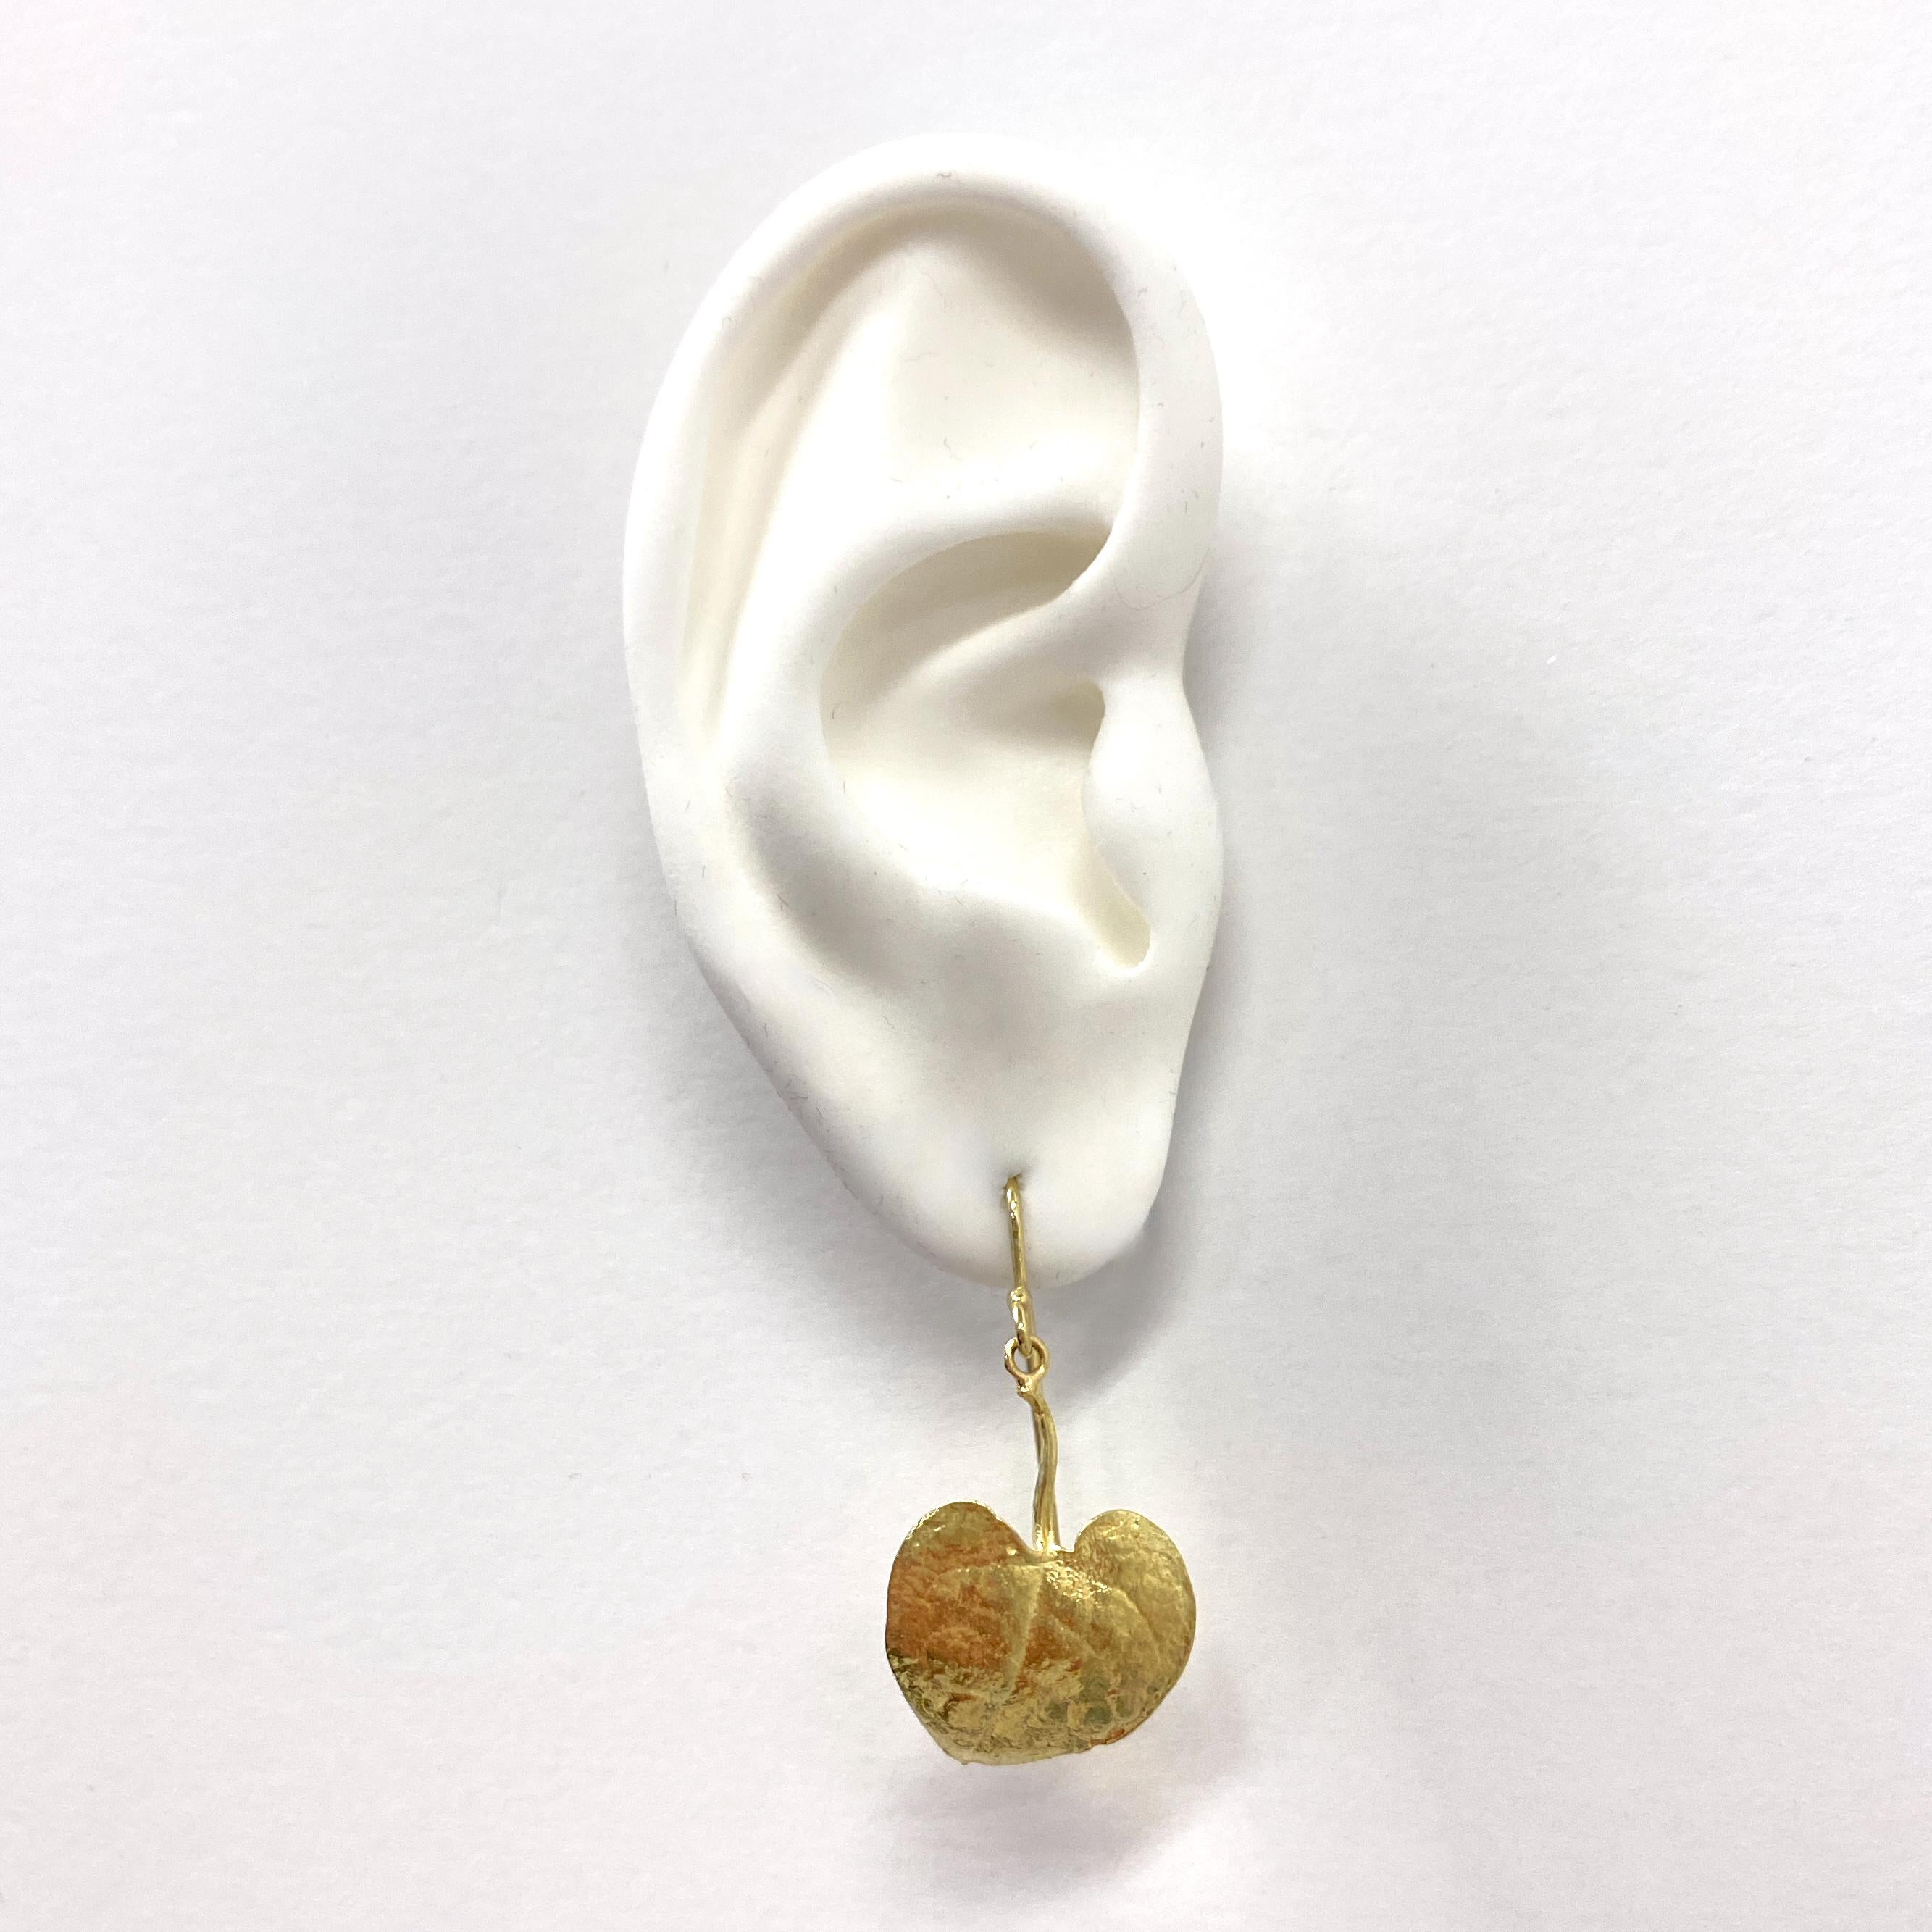 Perfectly Mismatched Leaf Dangle Earrings in 18 Karat Gold by Eytan Brandes In New Condition For Sale In Sherman Oaks, CA